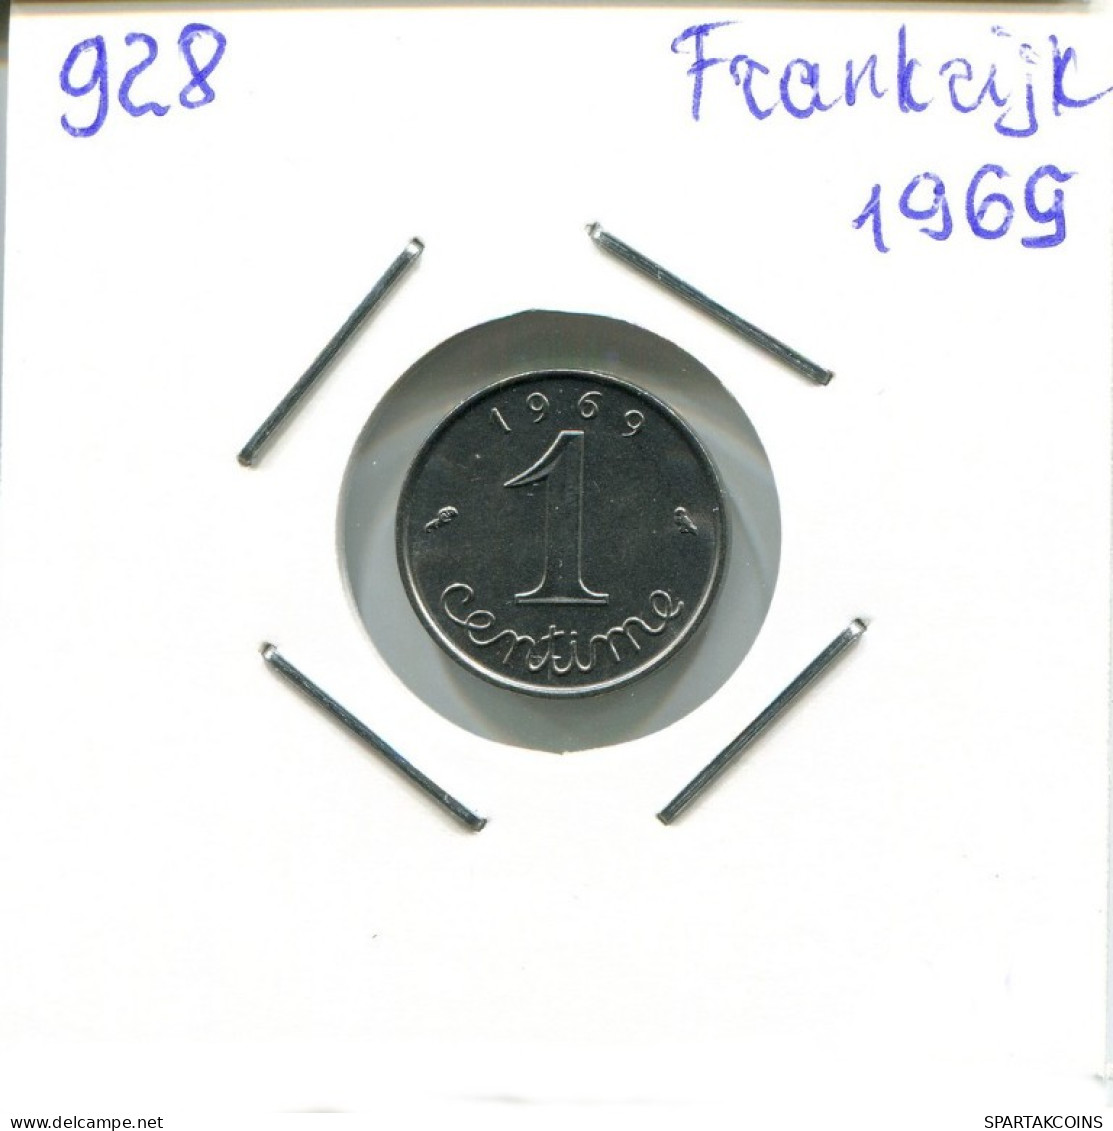 1 CENTIME 1969 FRANCE Coin French Coin #AM945.U.A - 1 Centime